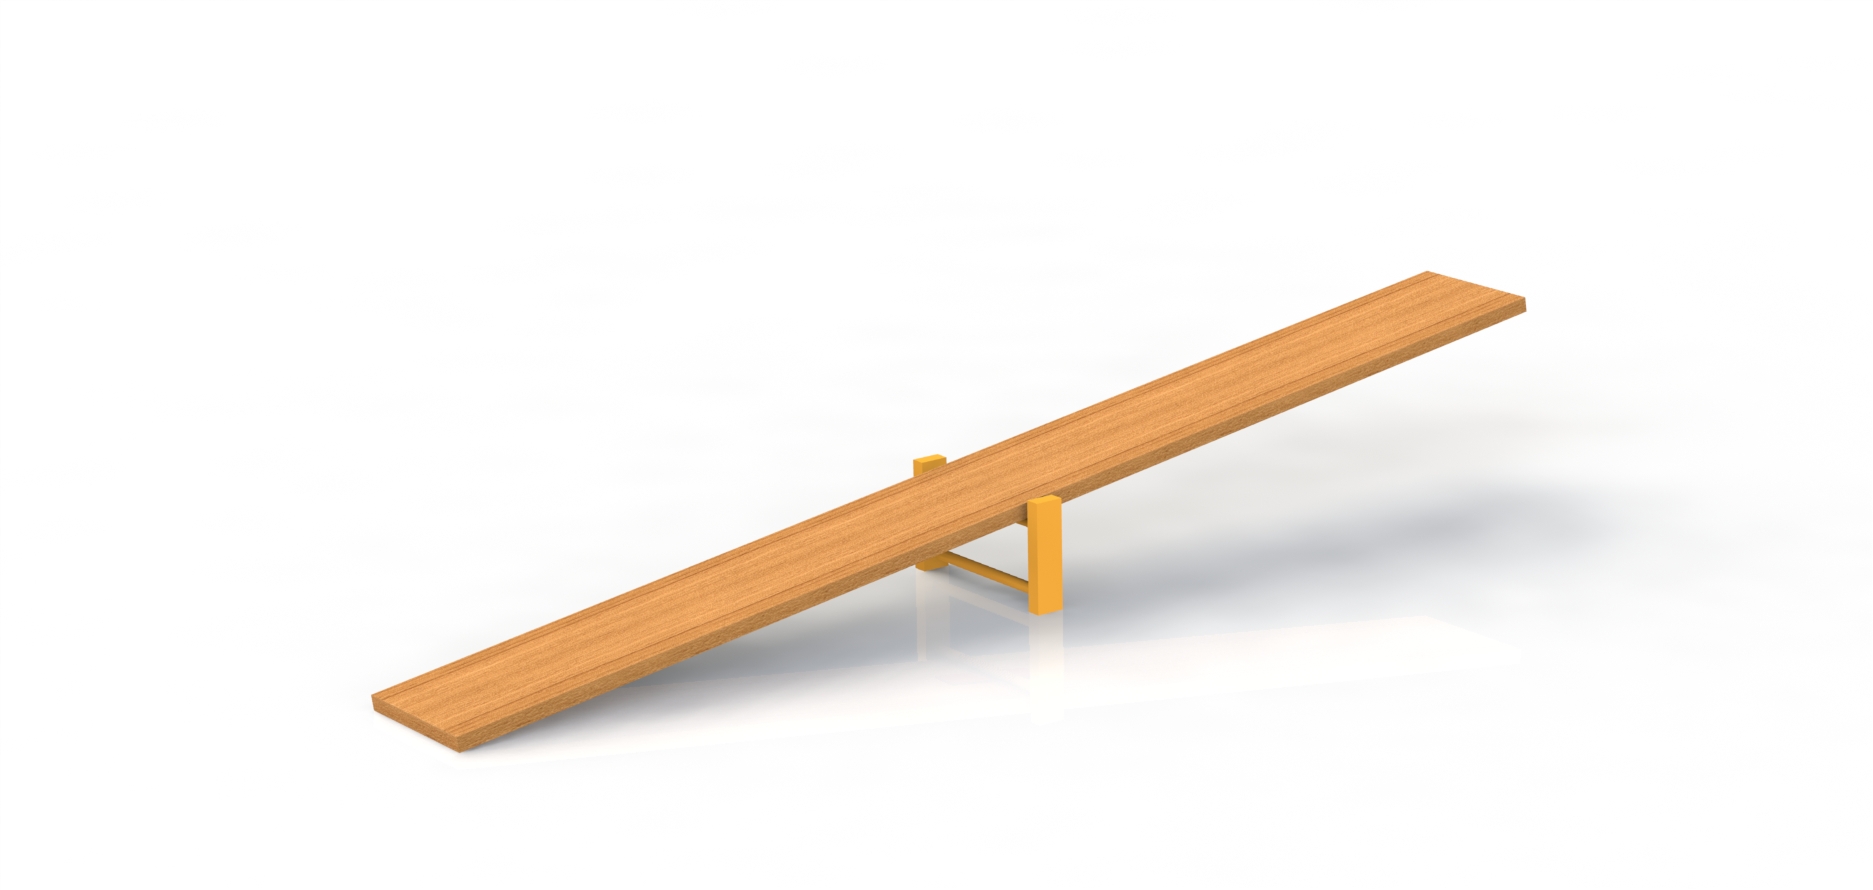 Product photo: Dog teeter-totter, У01 model